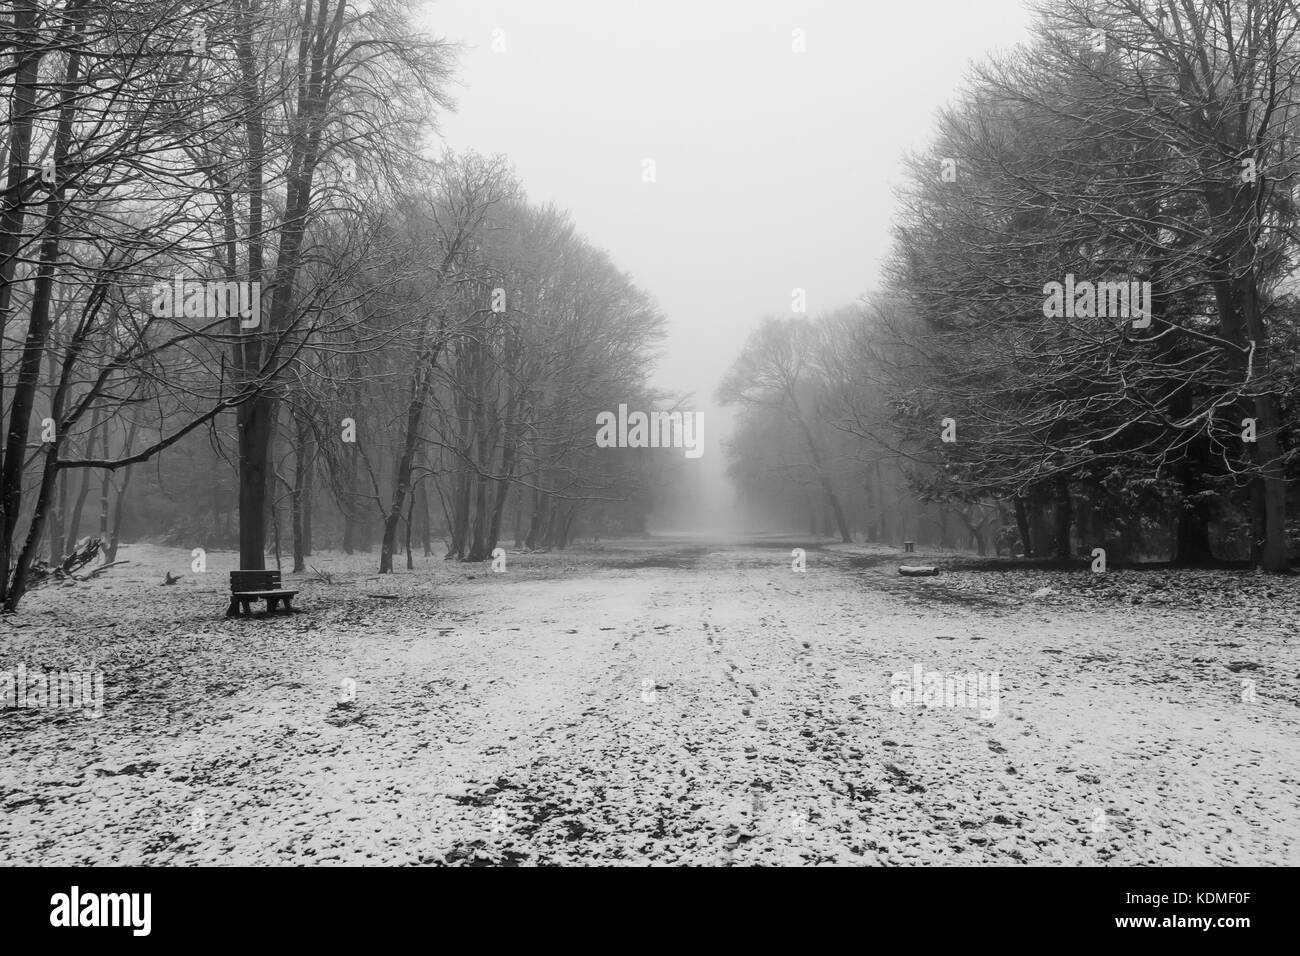 Black and white image of snowy winter scene in Sherwood Forest England Stock Photo